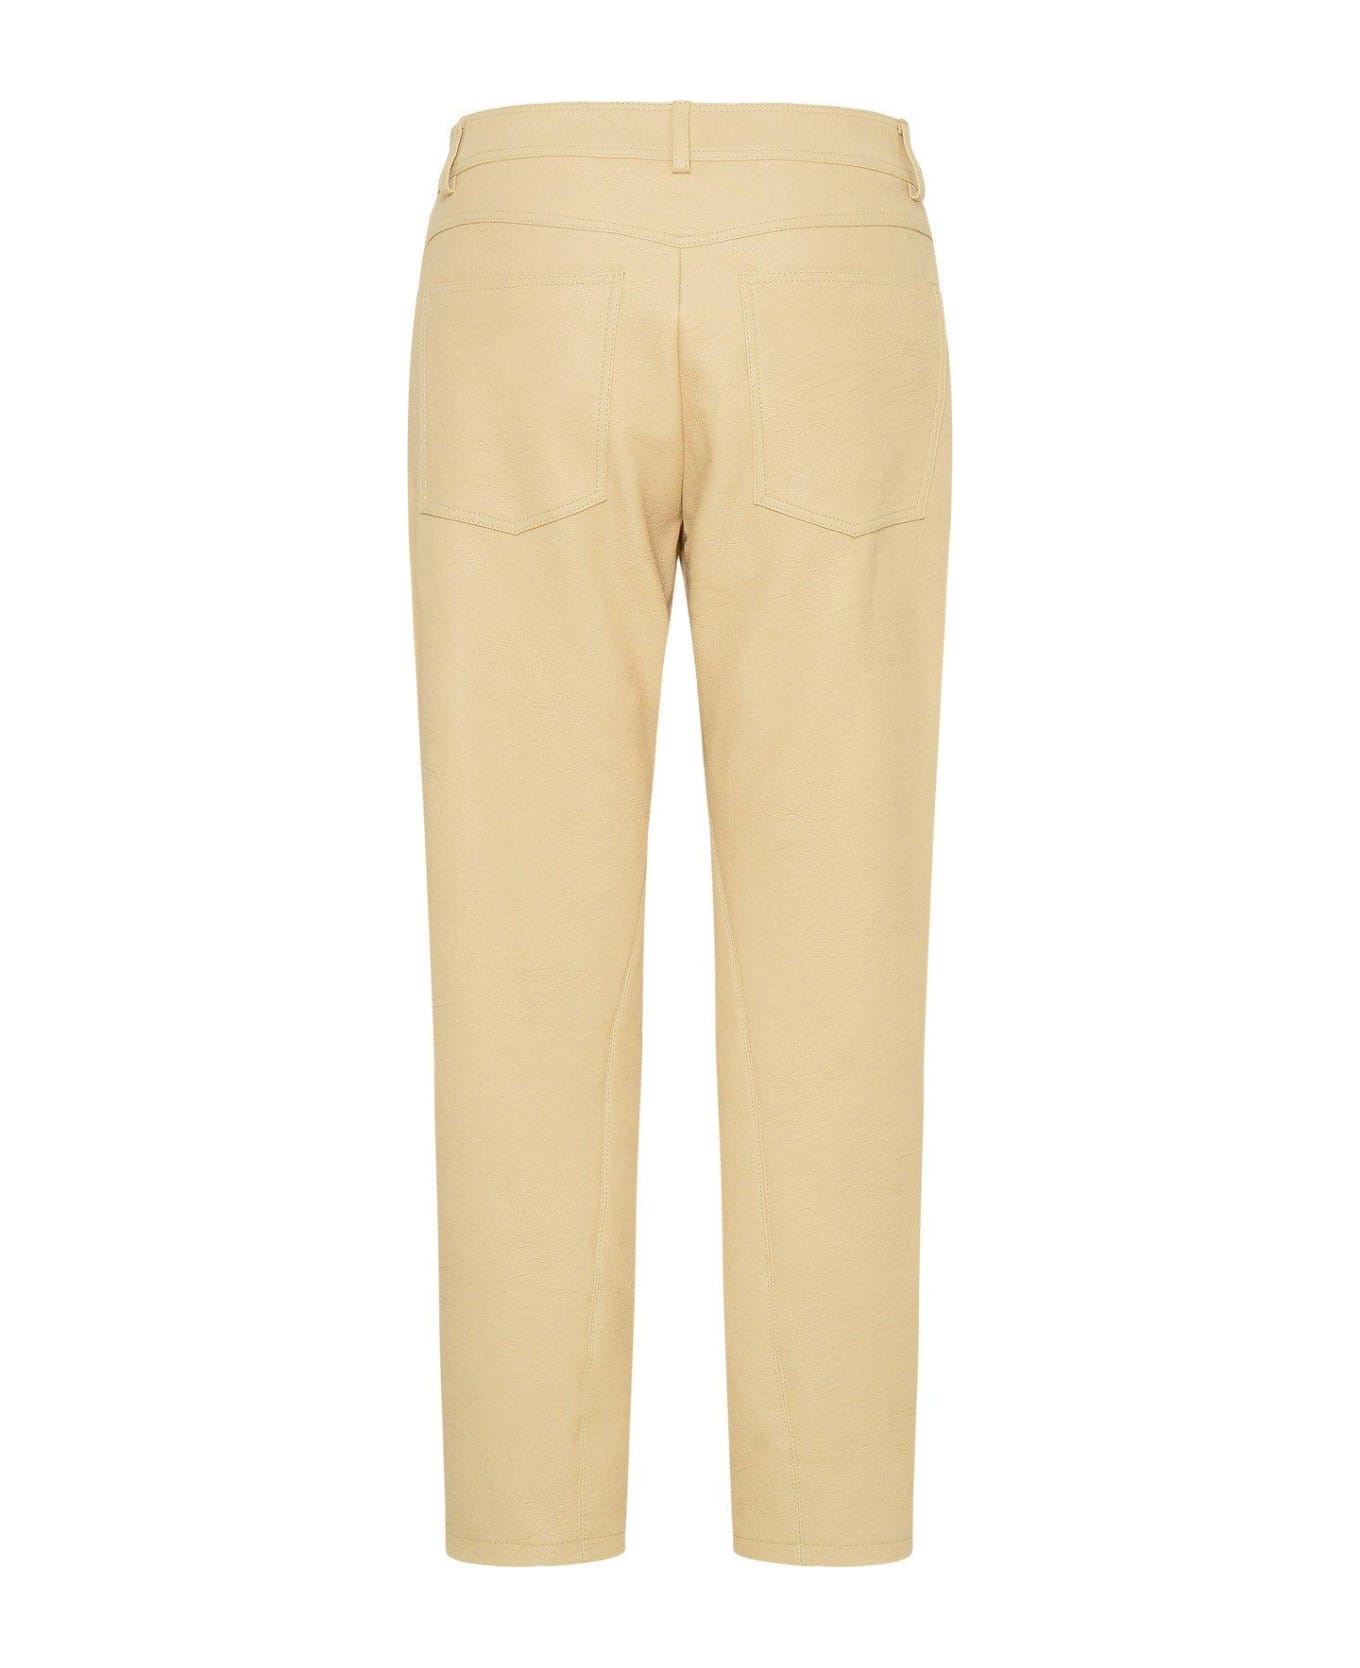 Stella McCartney Contrast Stitched Cropped Trousers - Beige ボトムス